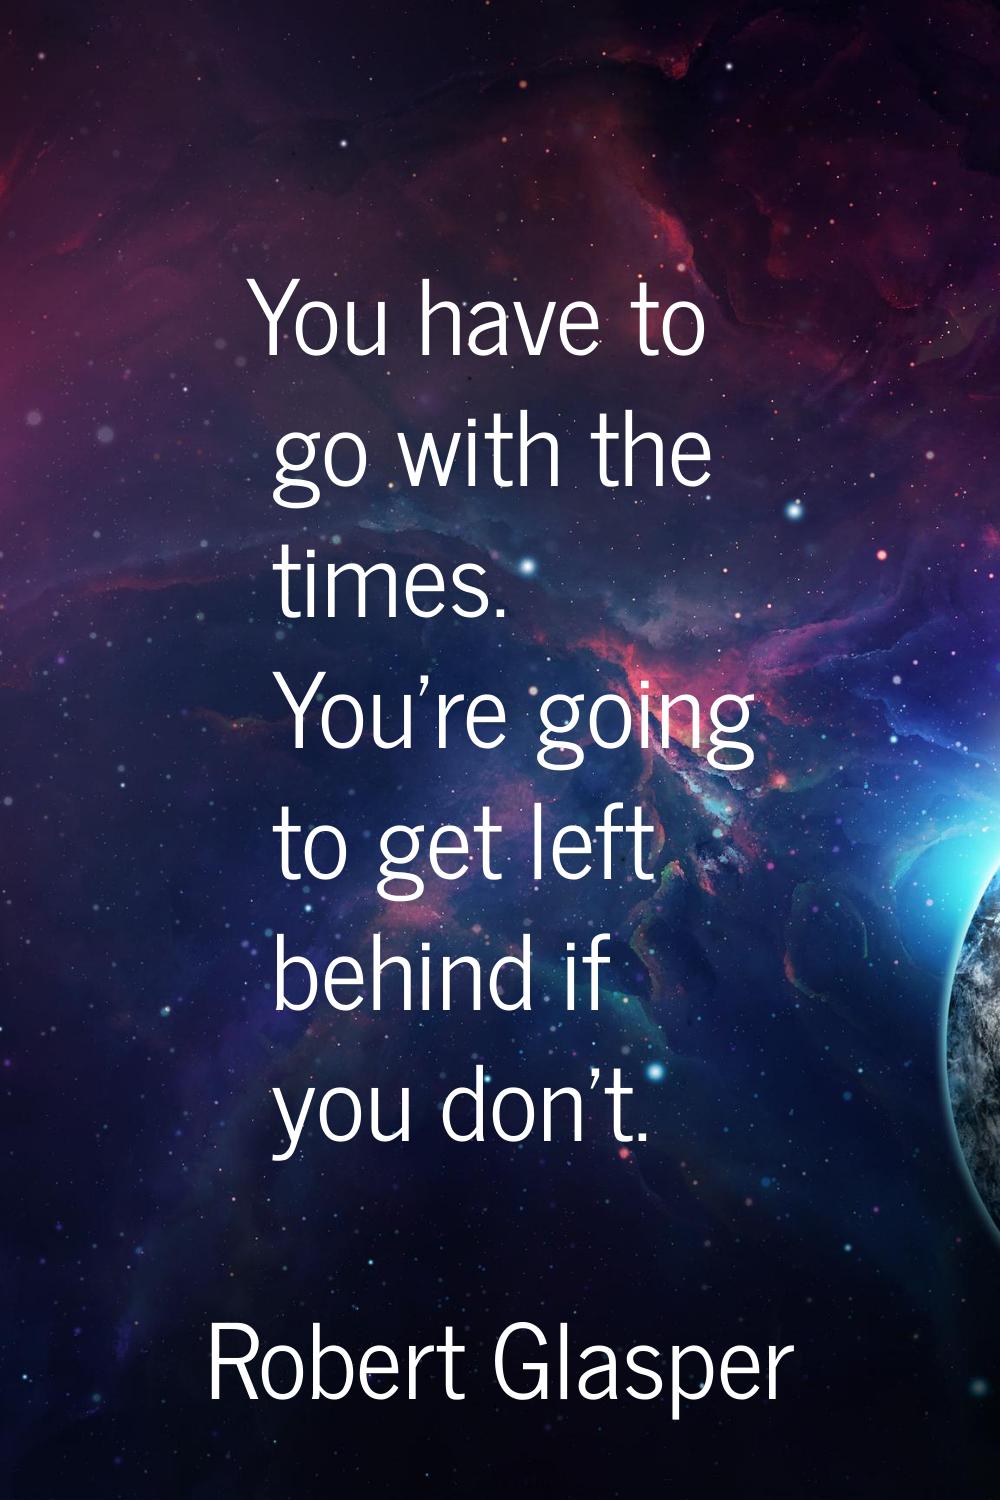 You have to go with the times. You're going to get left behind if you don't.